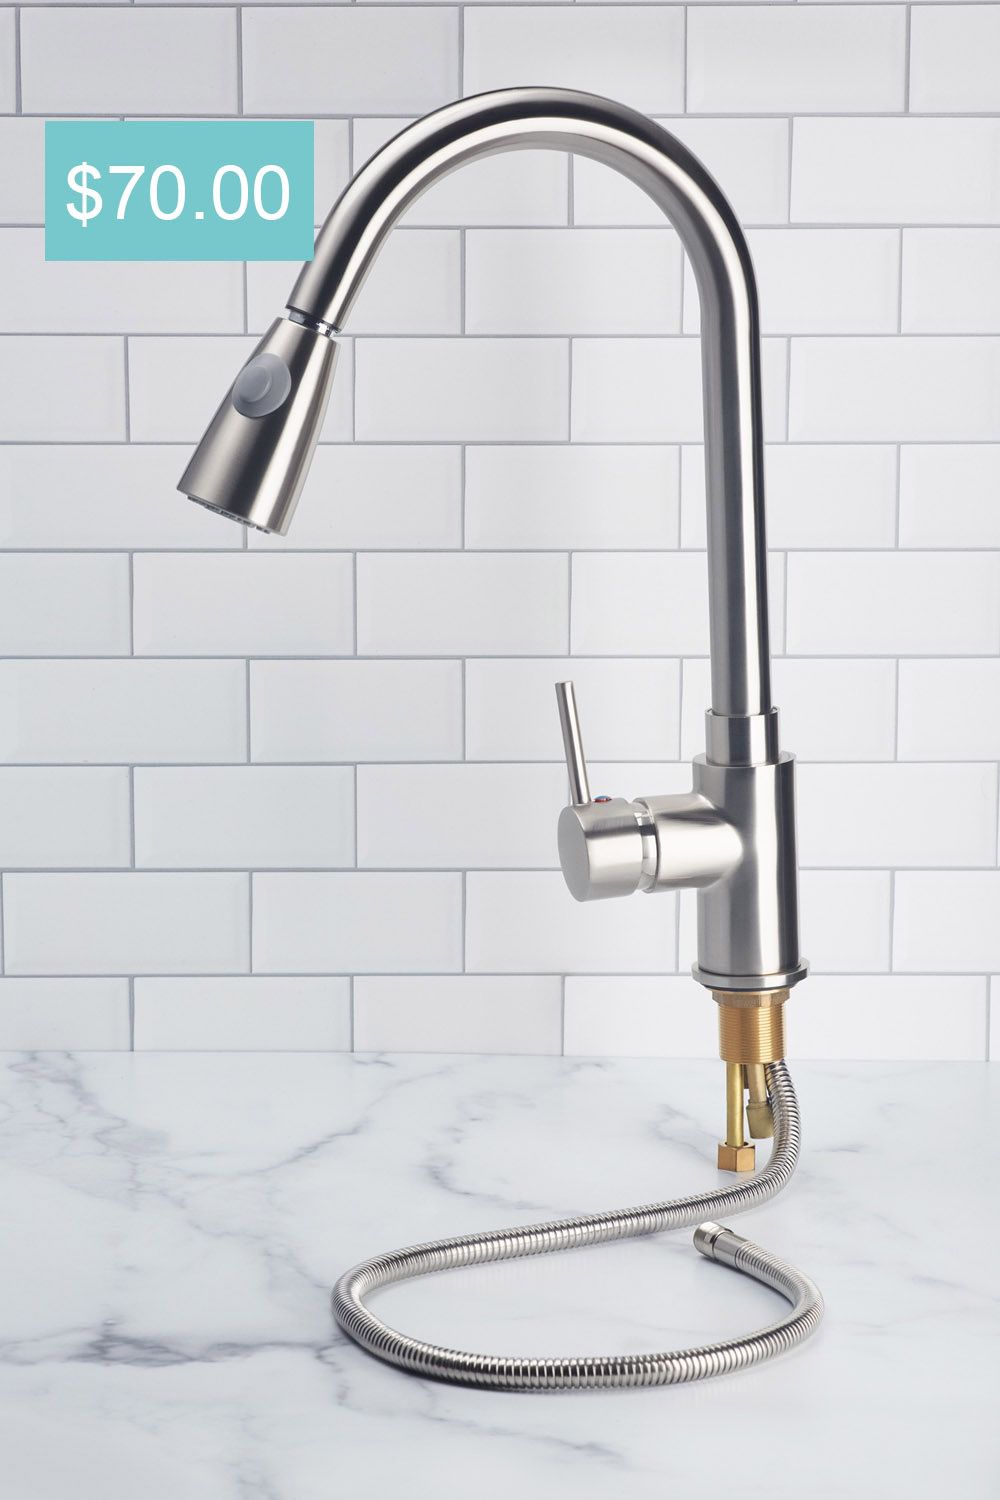 Brushed Nickel Kitchen Faucet Pull Down With Sprayer